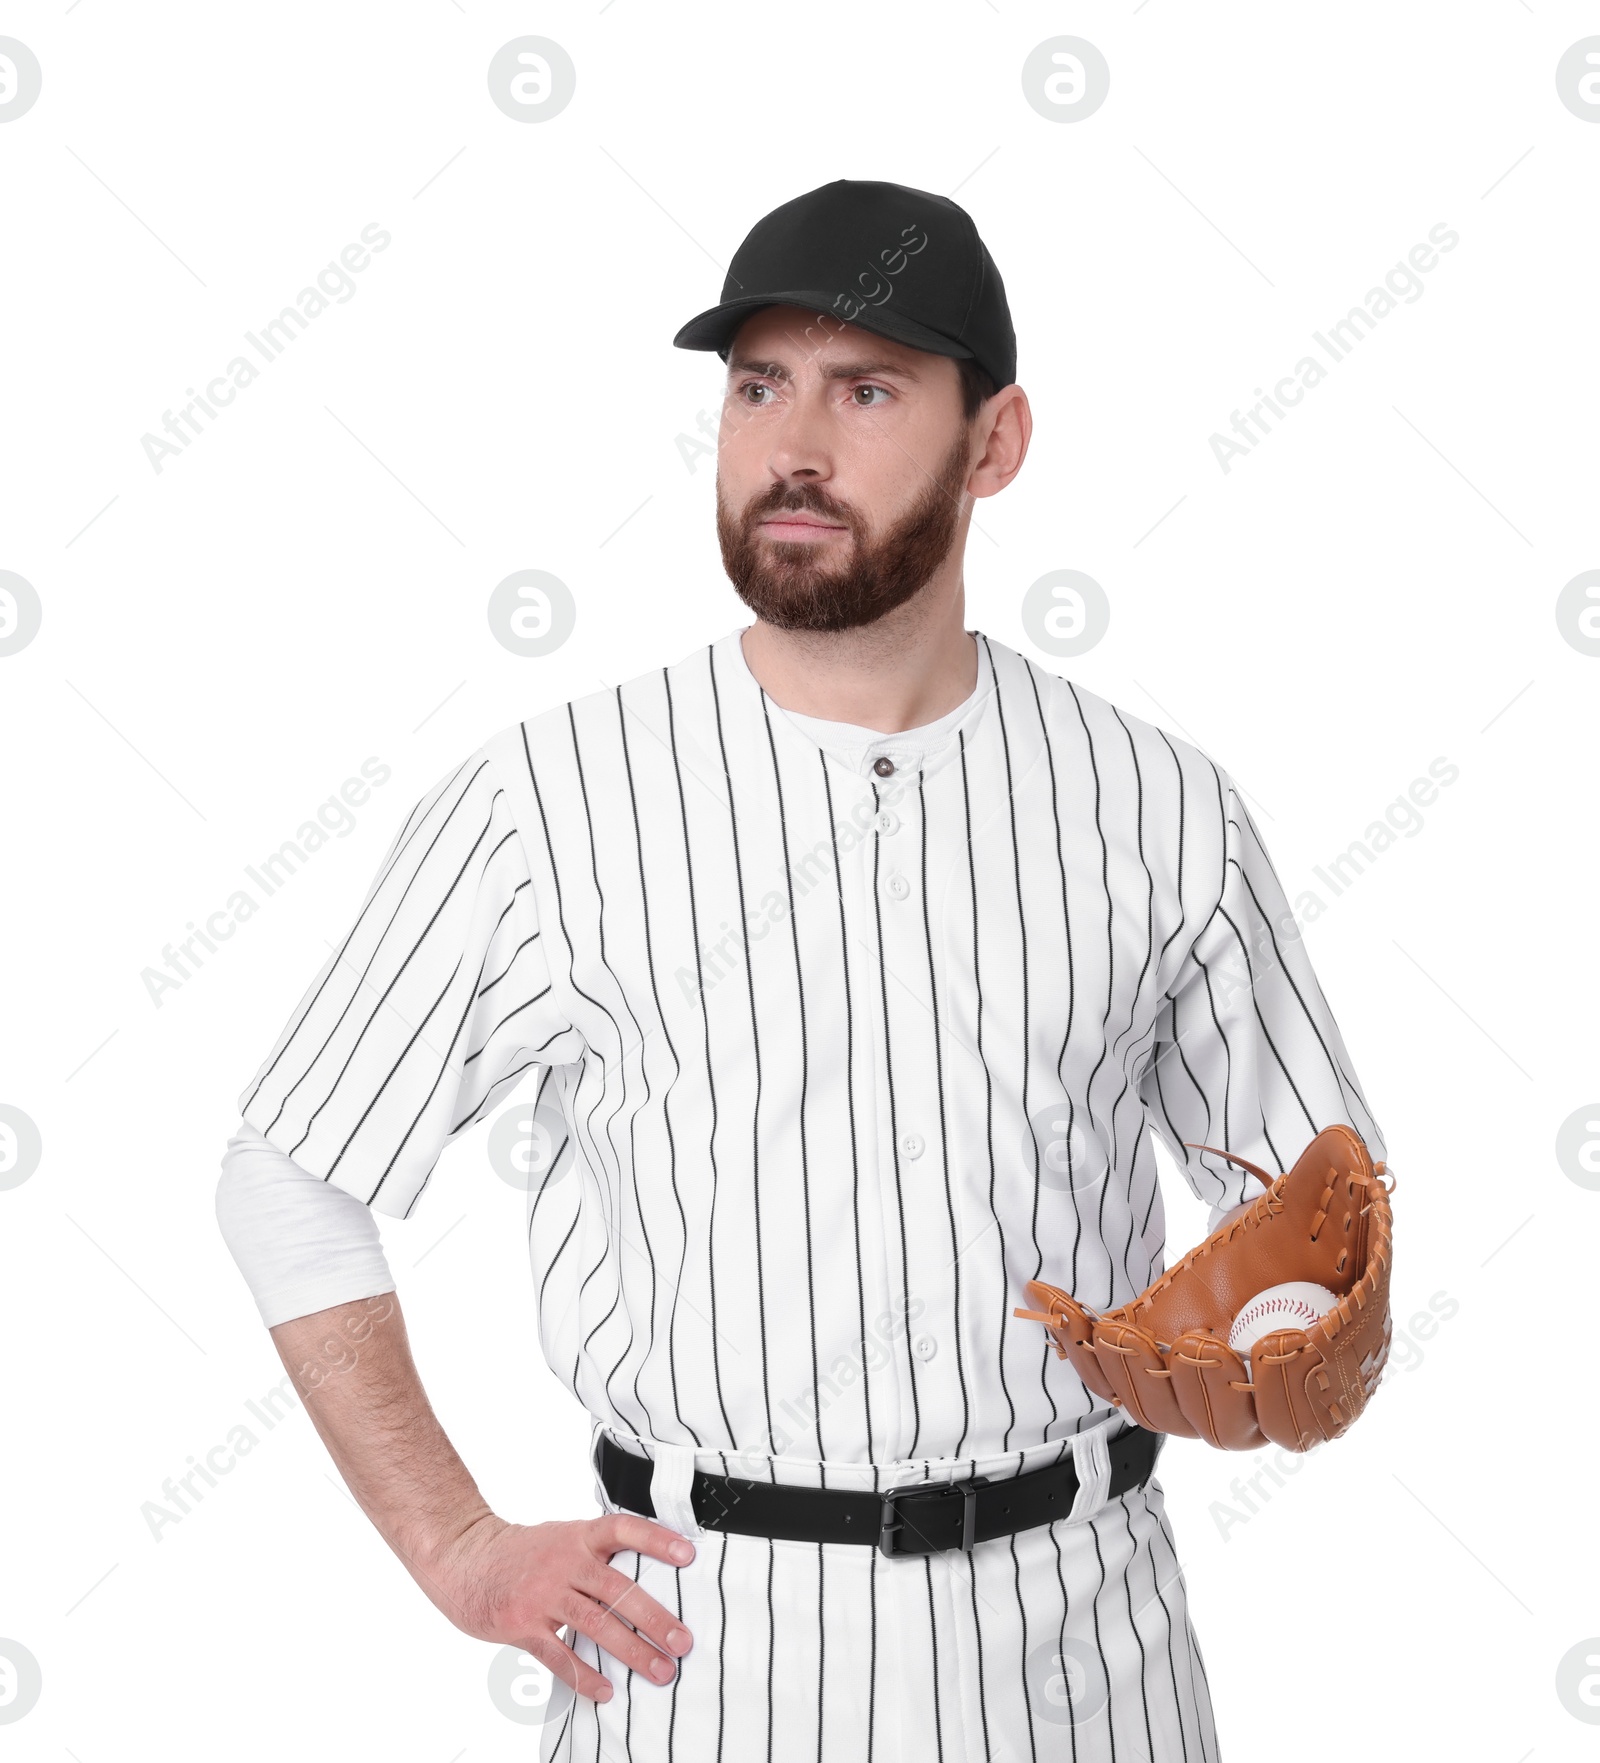 Photo of Baseball player with leather glove and ball on white background